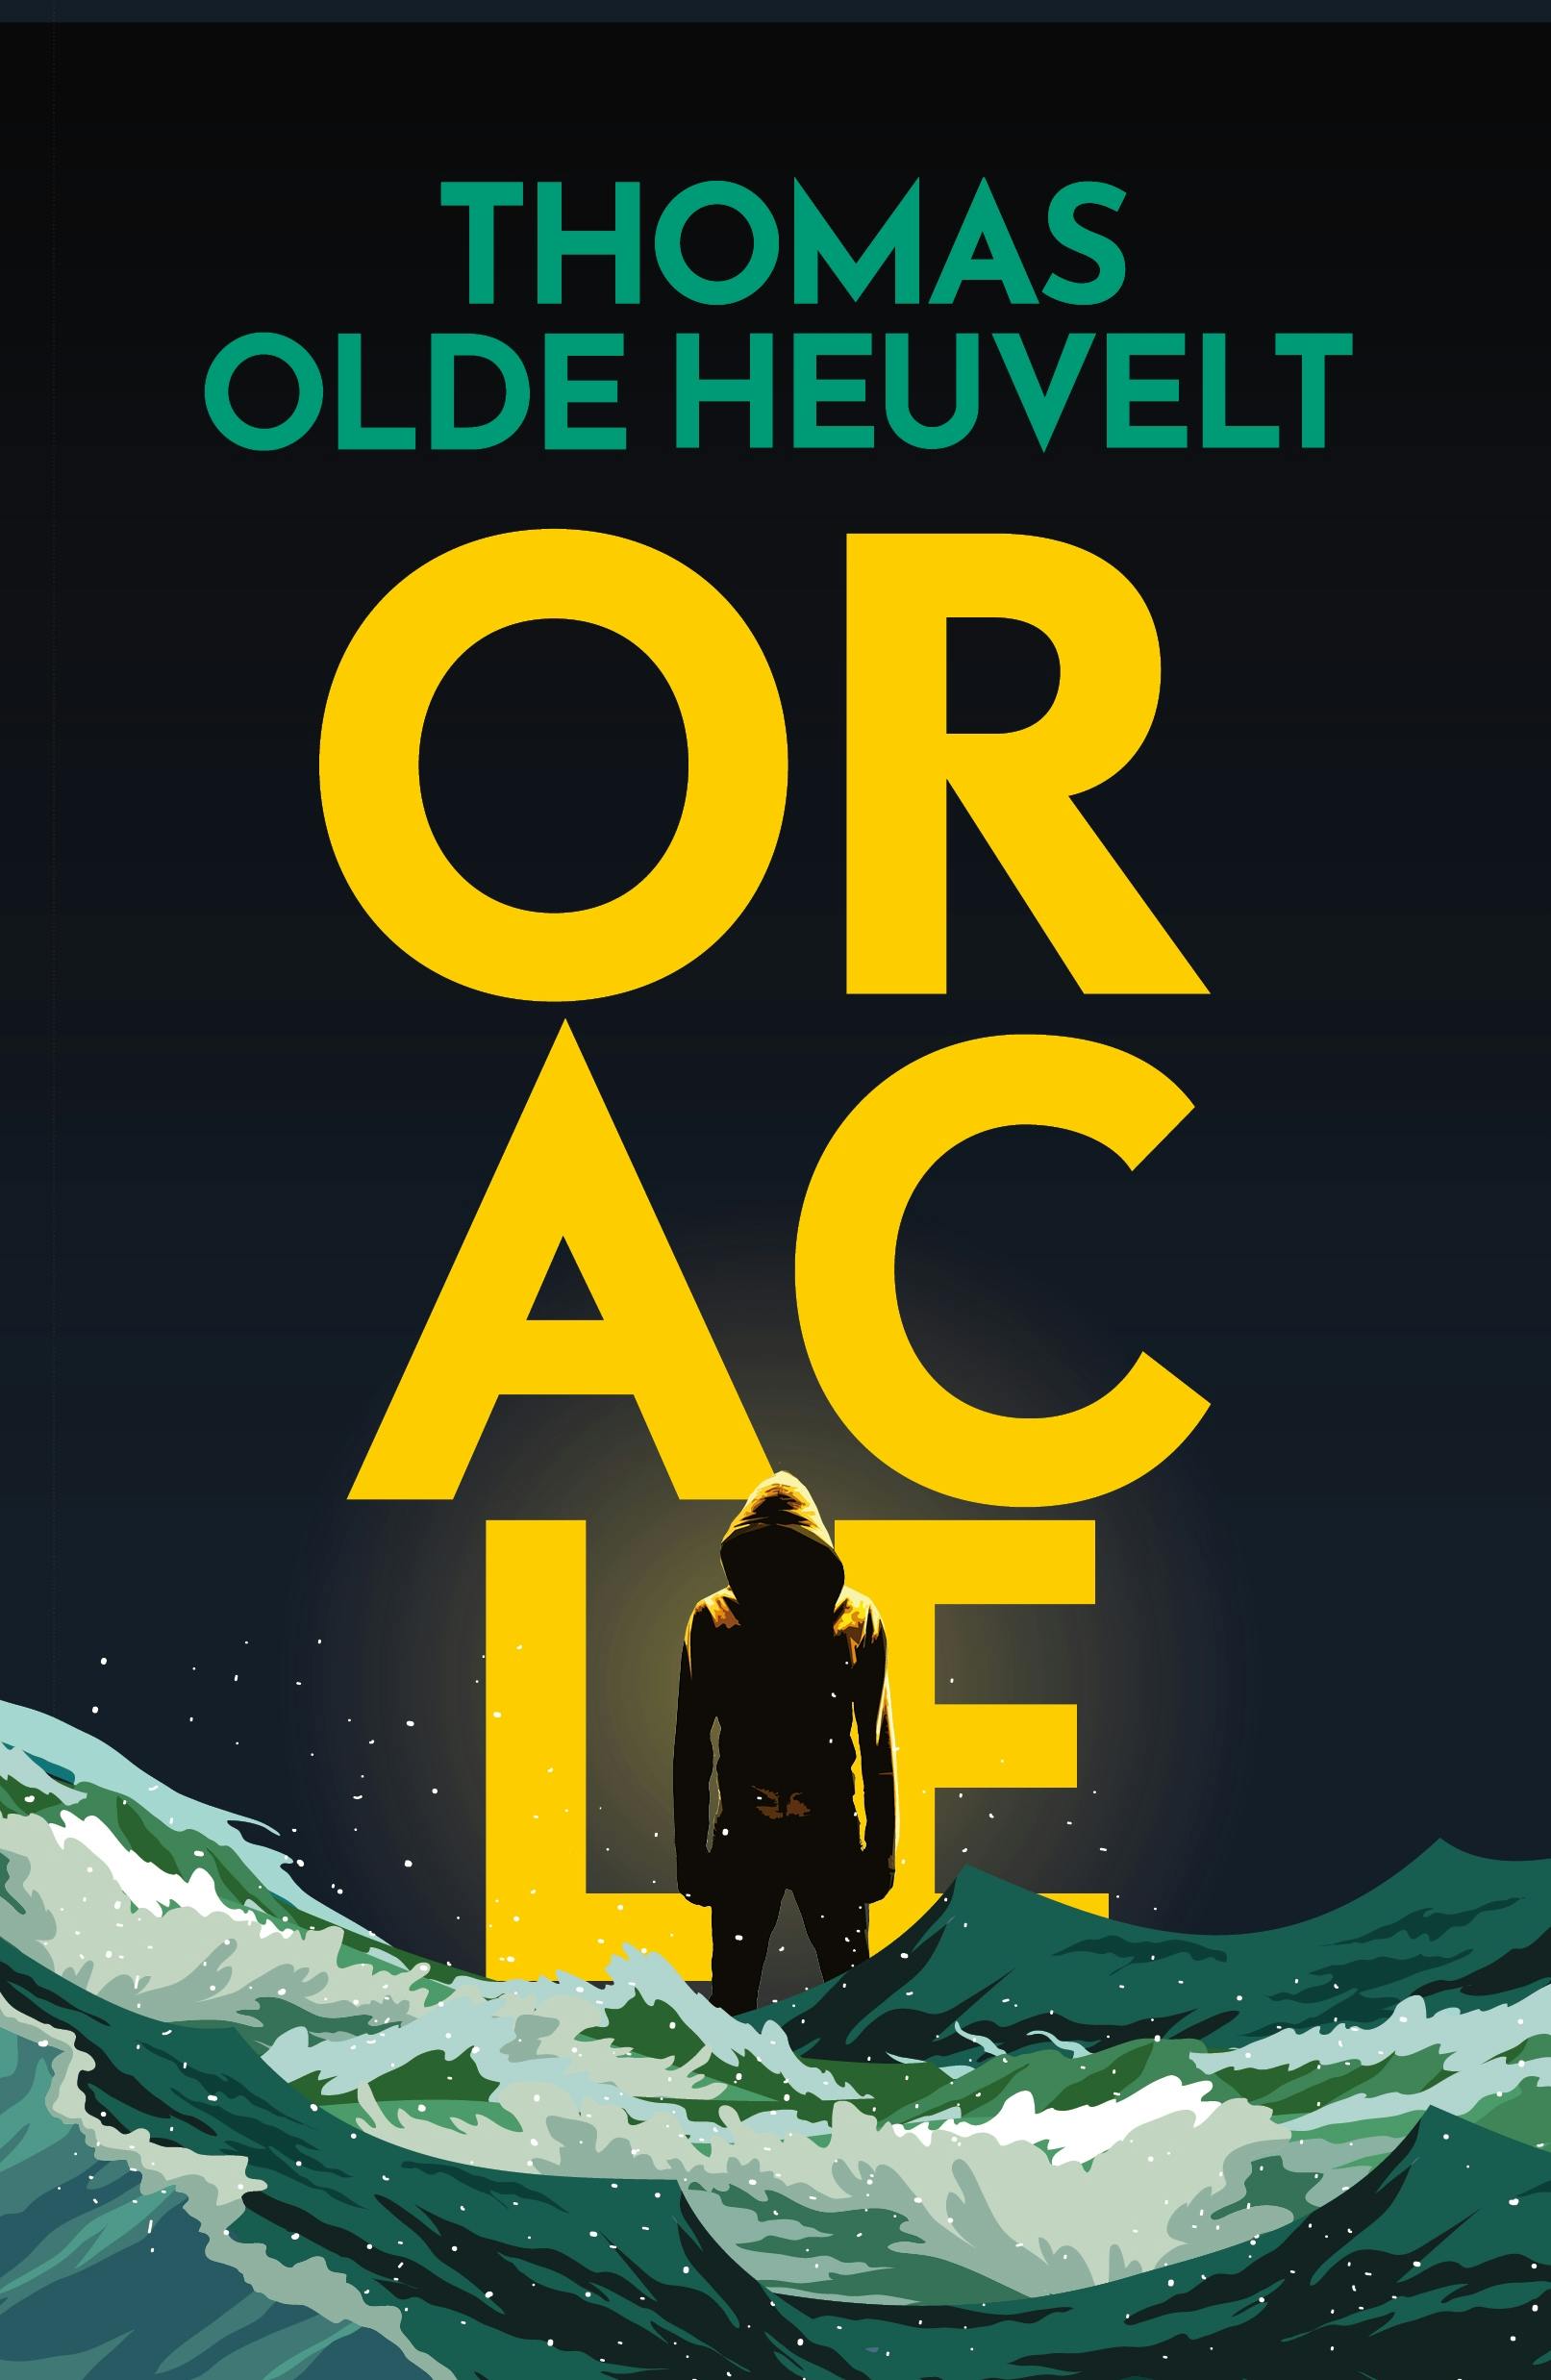 Cover for the book titled as: Oracle